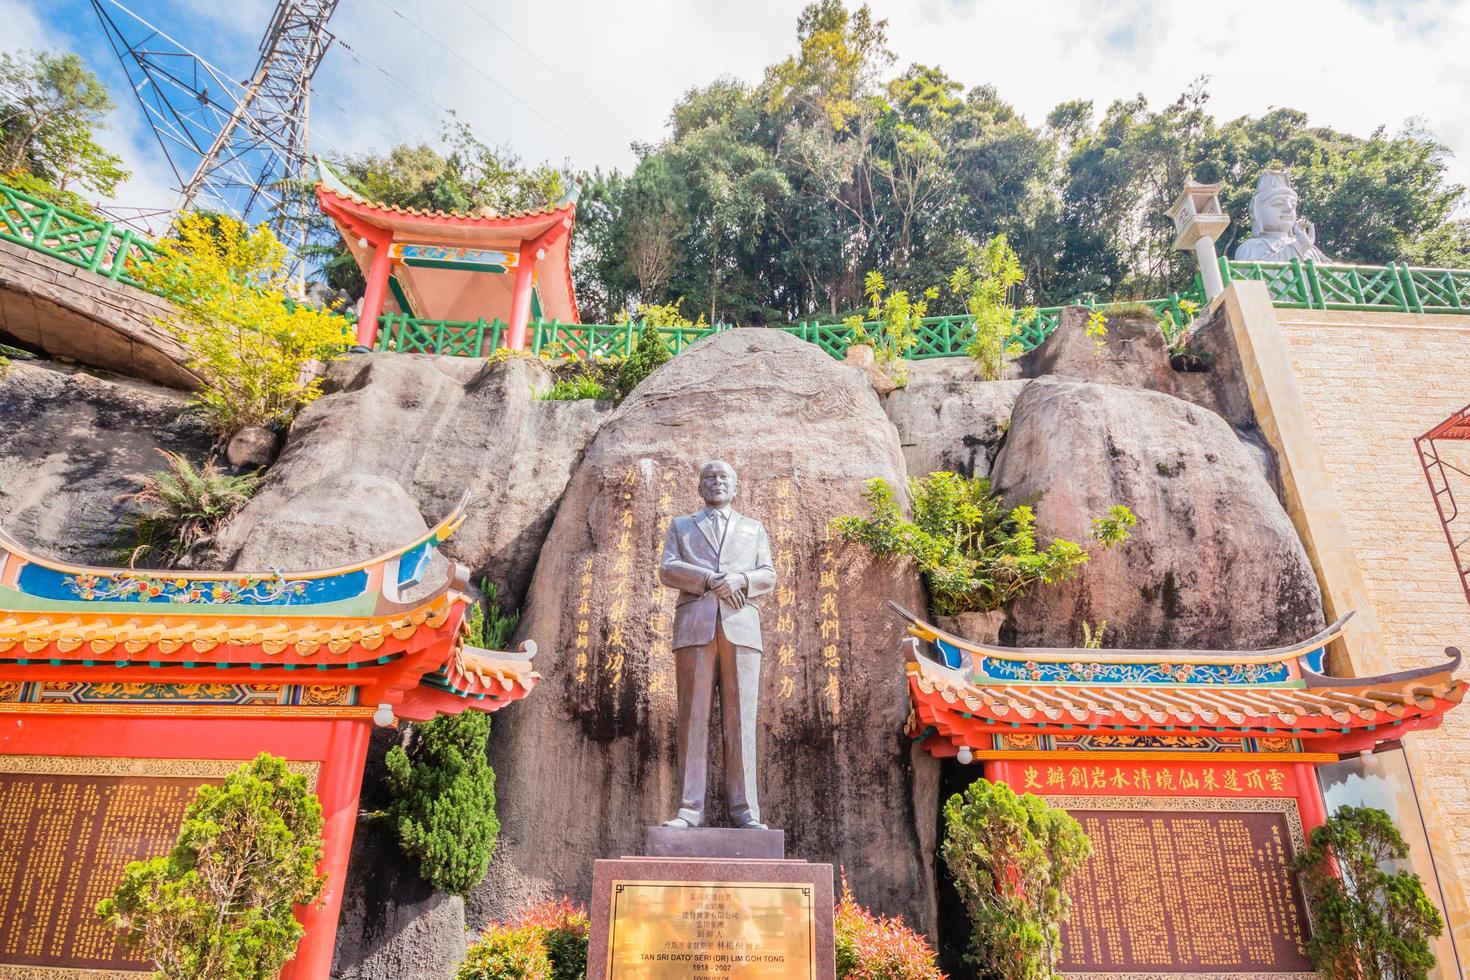 Monument of Lim Goh Tong at the Chin Swee Caves Temple, Malaysia, 2017 photo